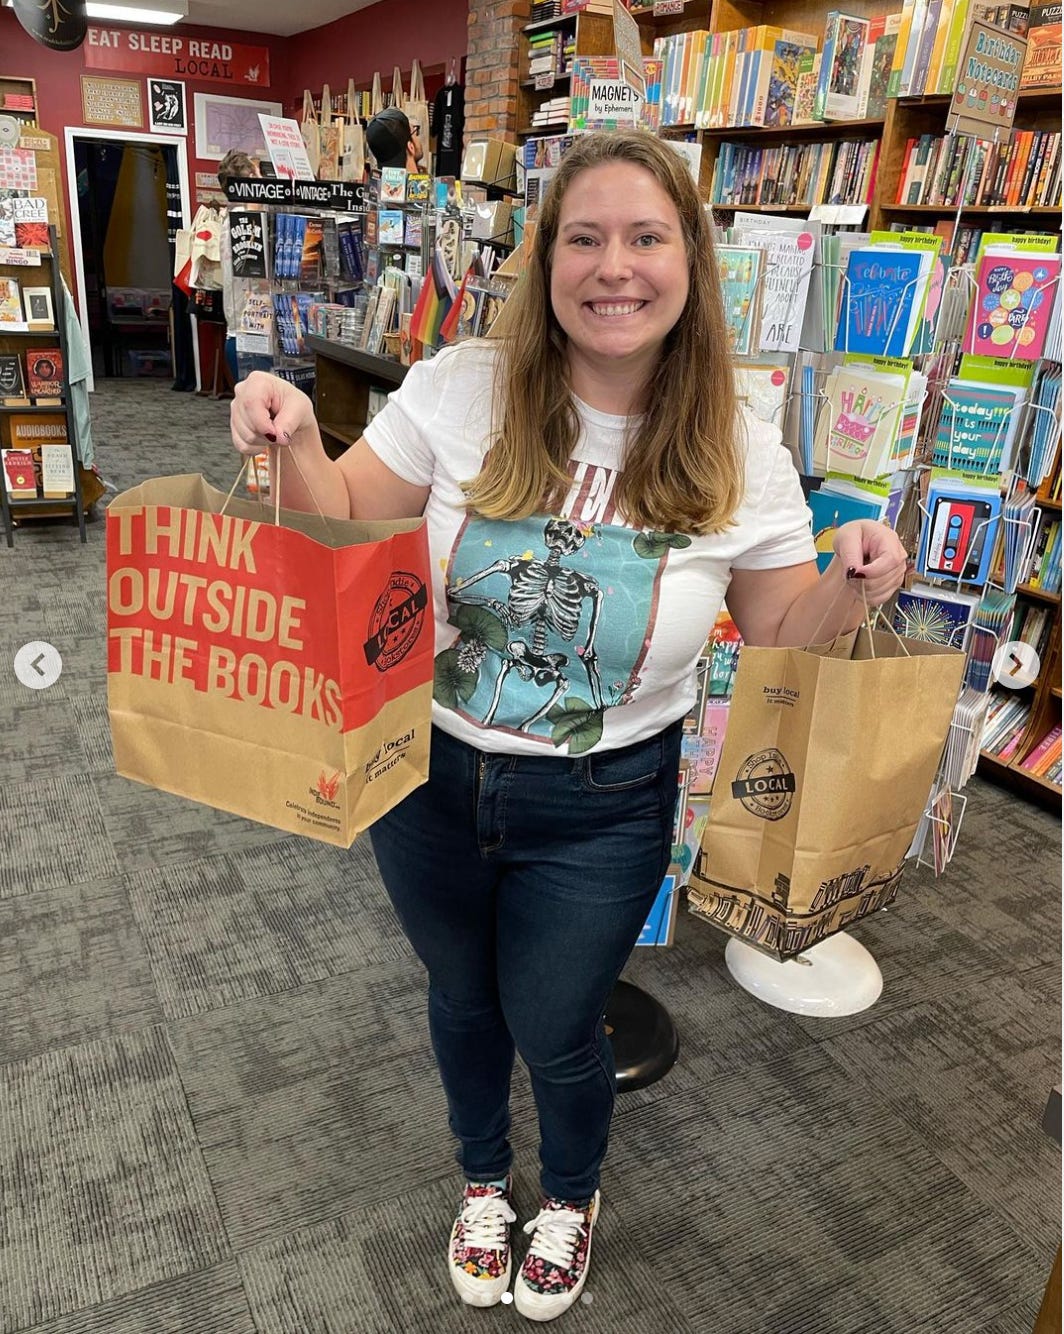 Me, a 30-something white woman, in a small bookstore holding up two bags full of books. 